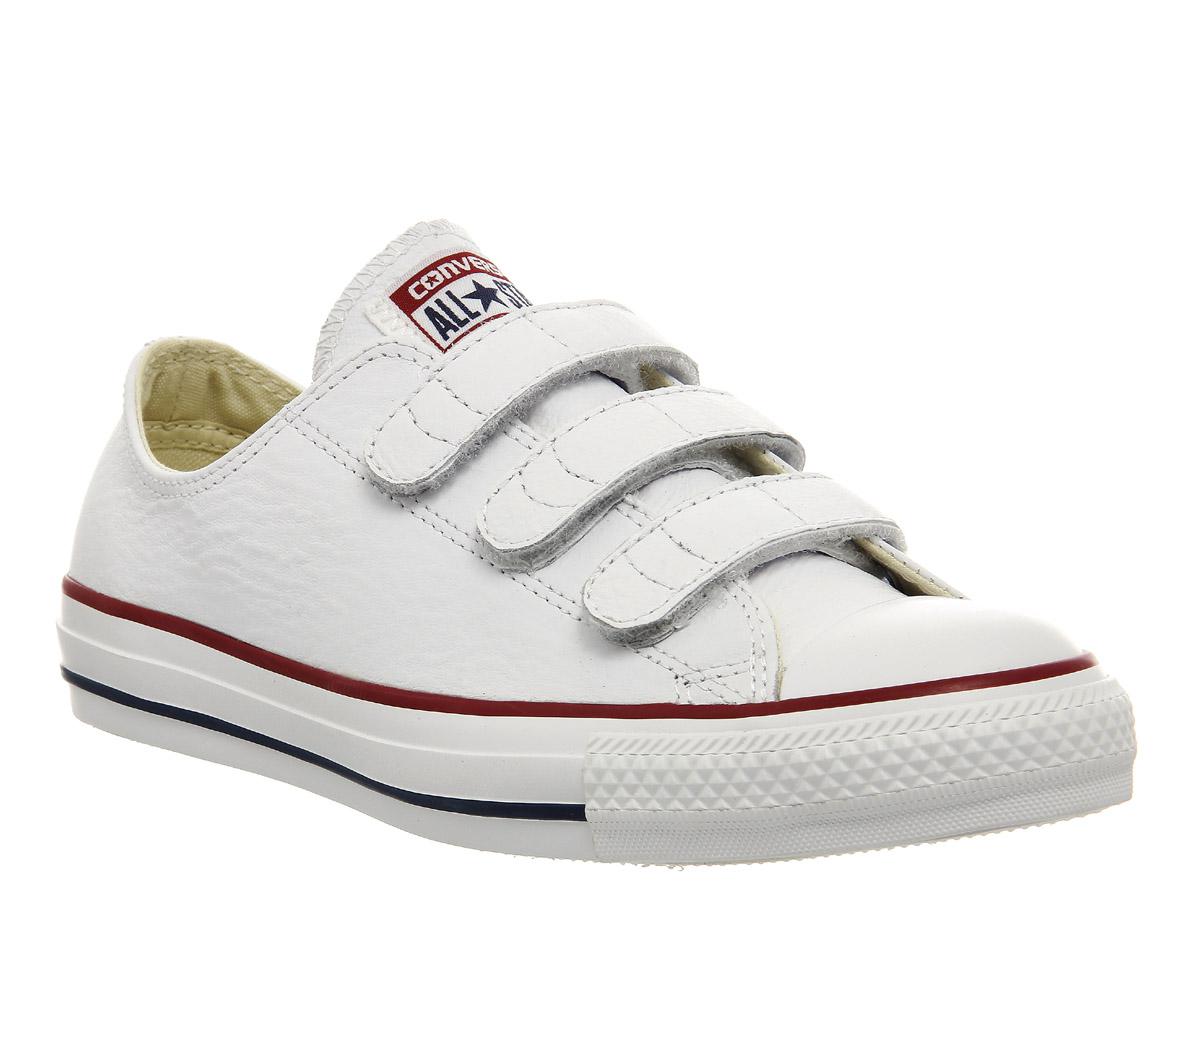 Converse Leather Ctas 3v in White - Lyst